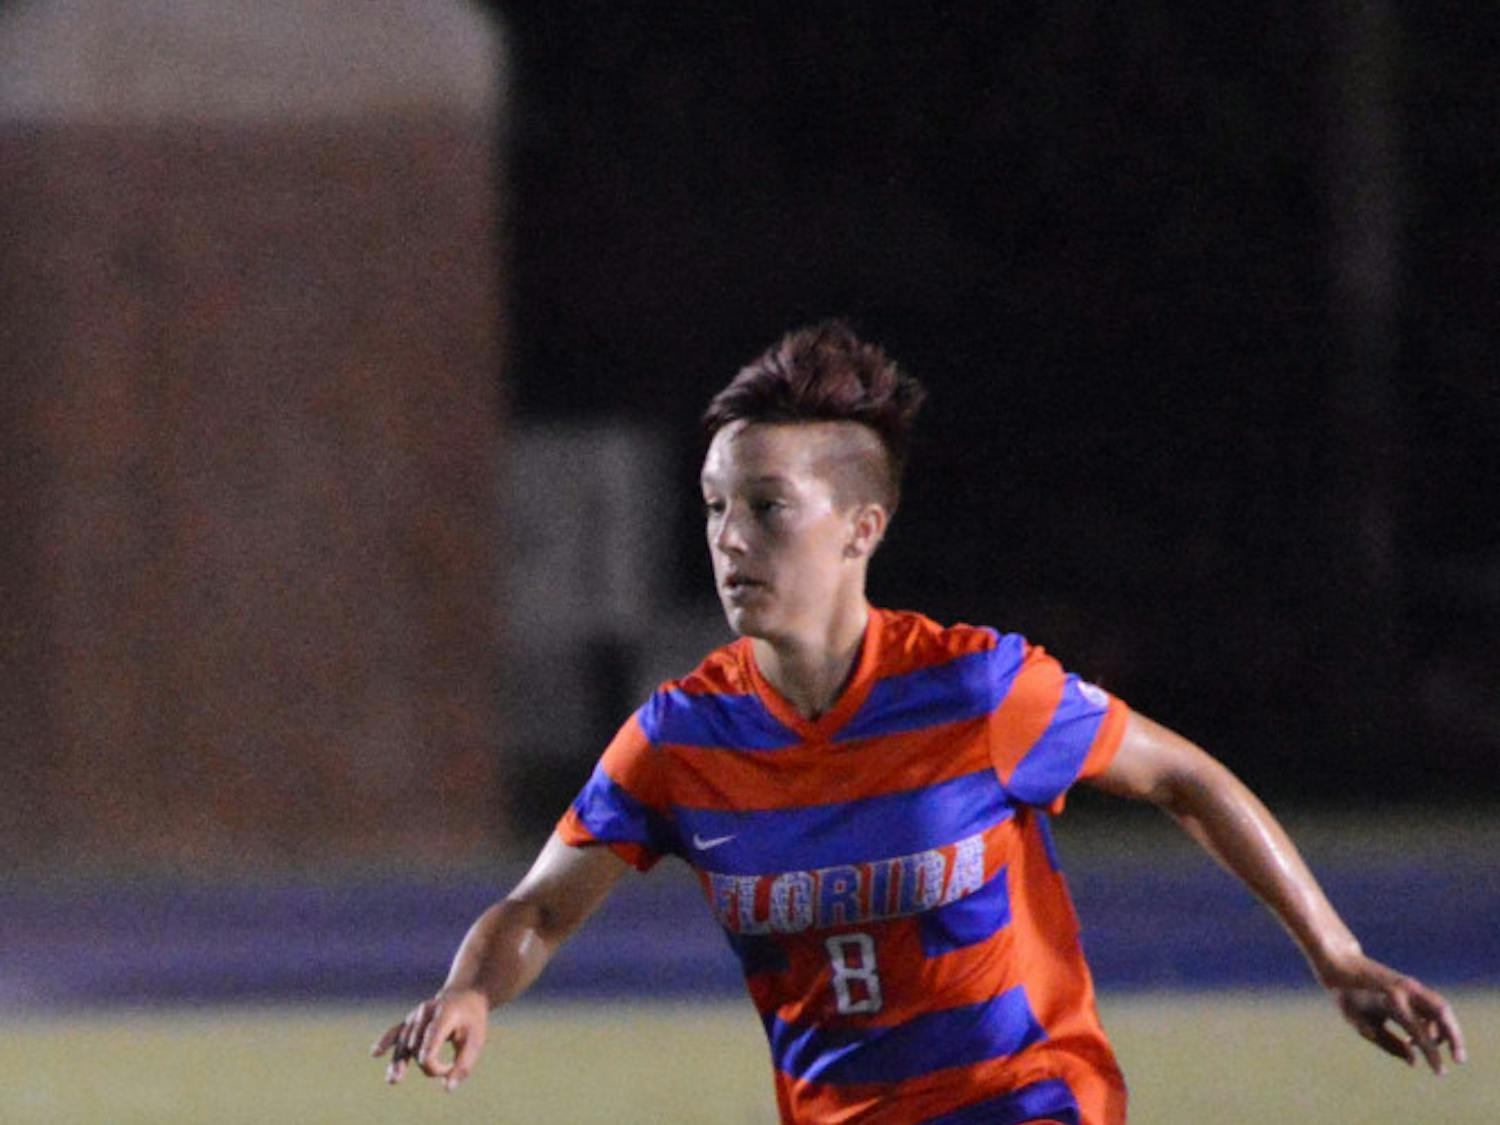 Claire Falknor dribbles the ball during Florida's 3-0 win against Miami on Aug. 22 at James G. Pressly Stadium.